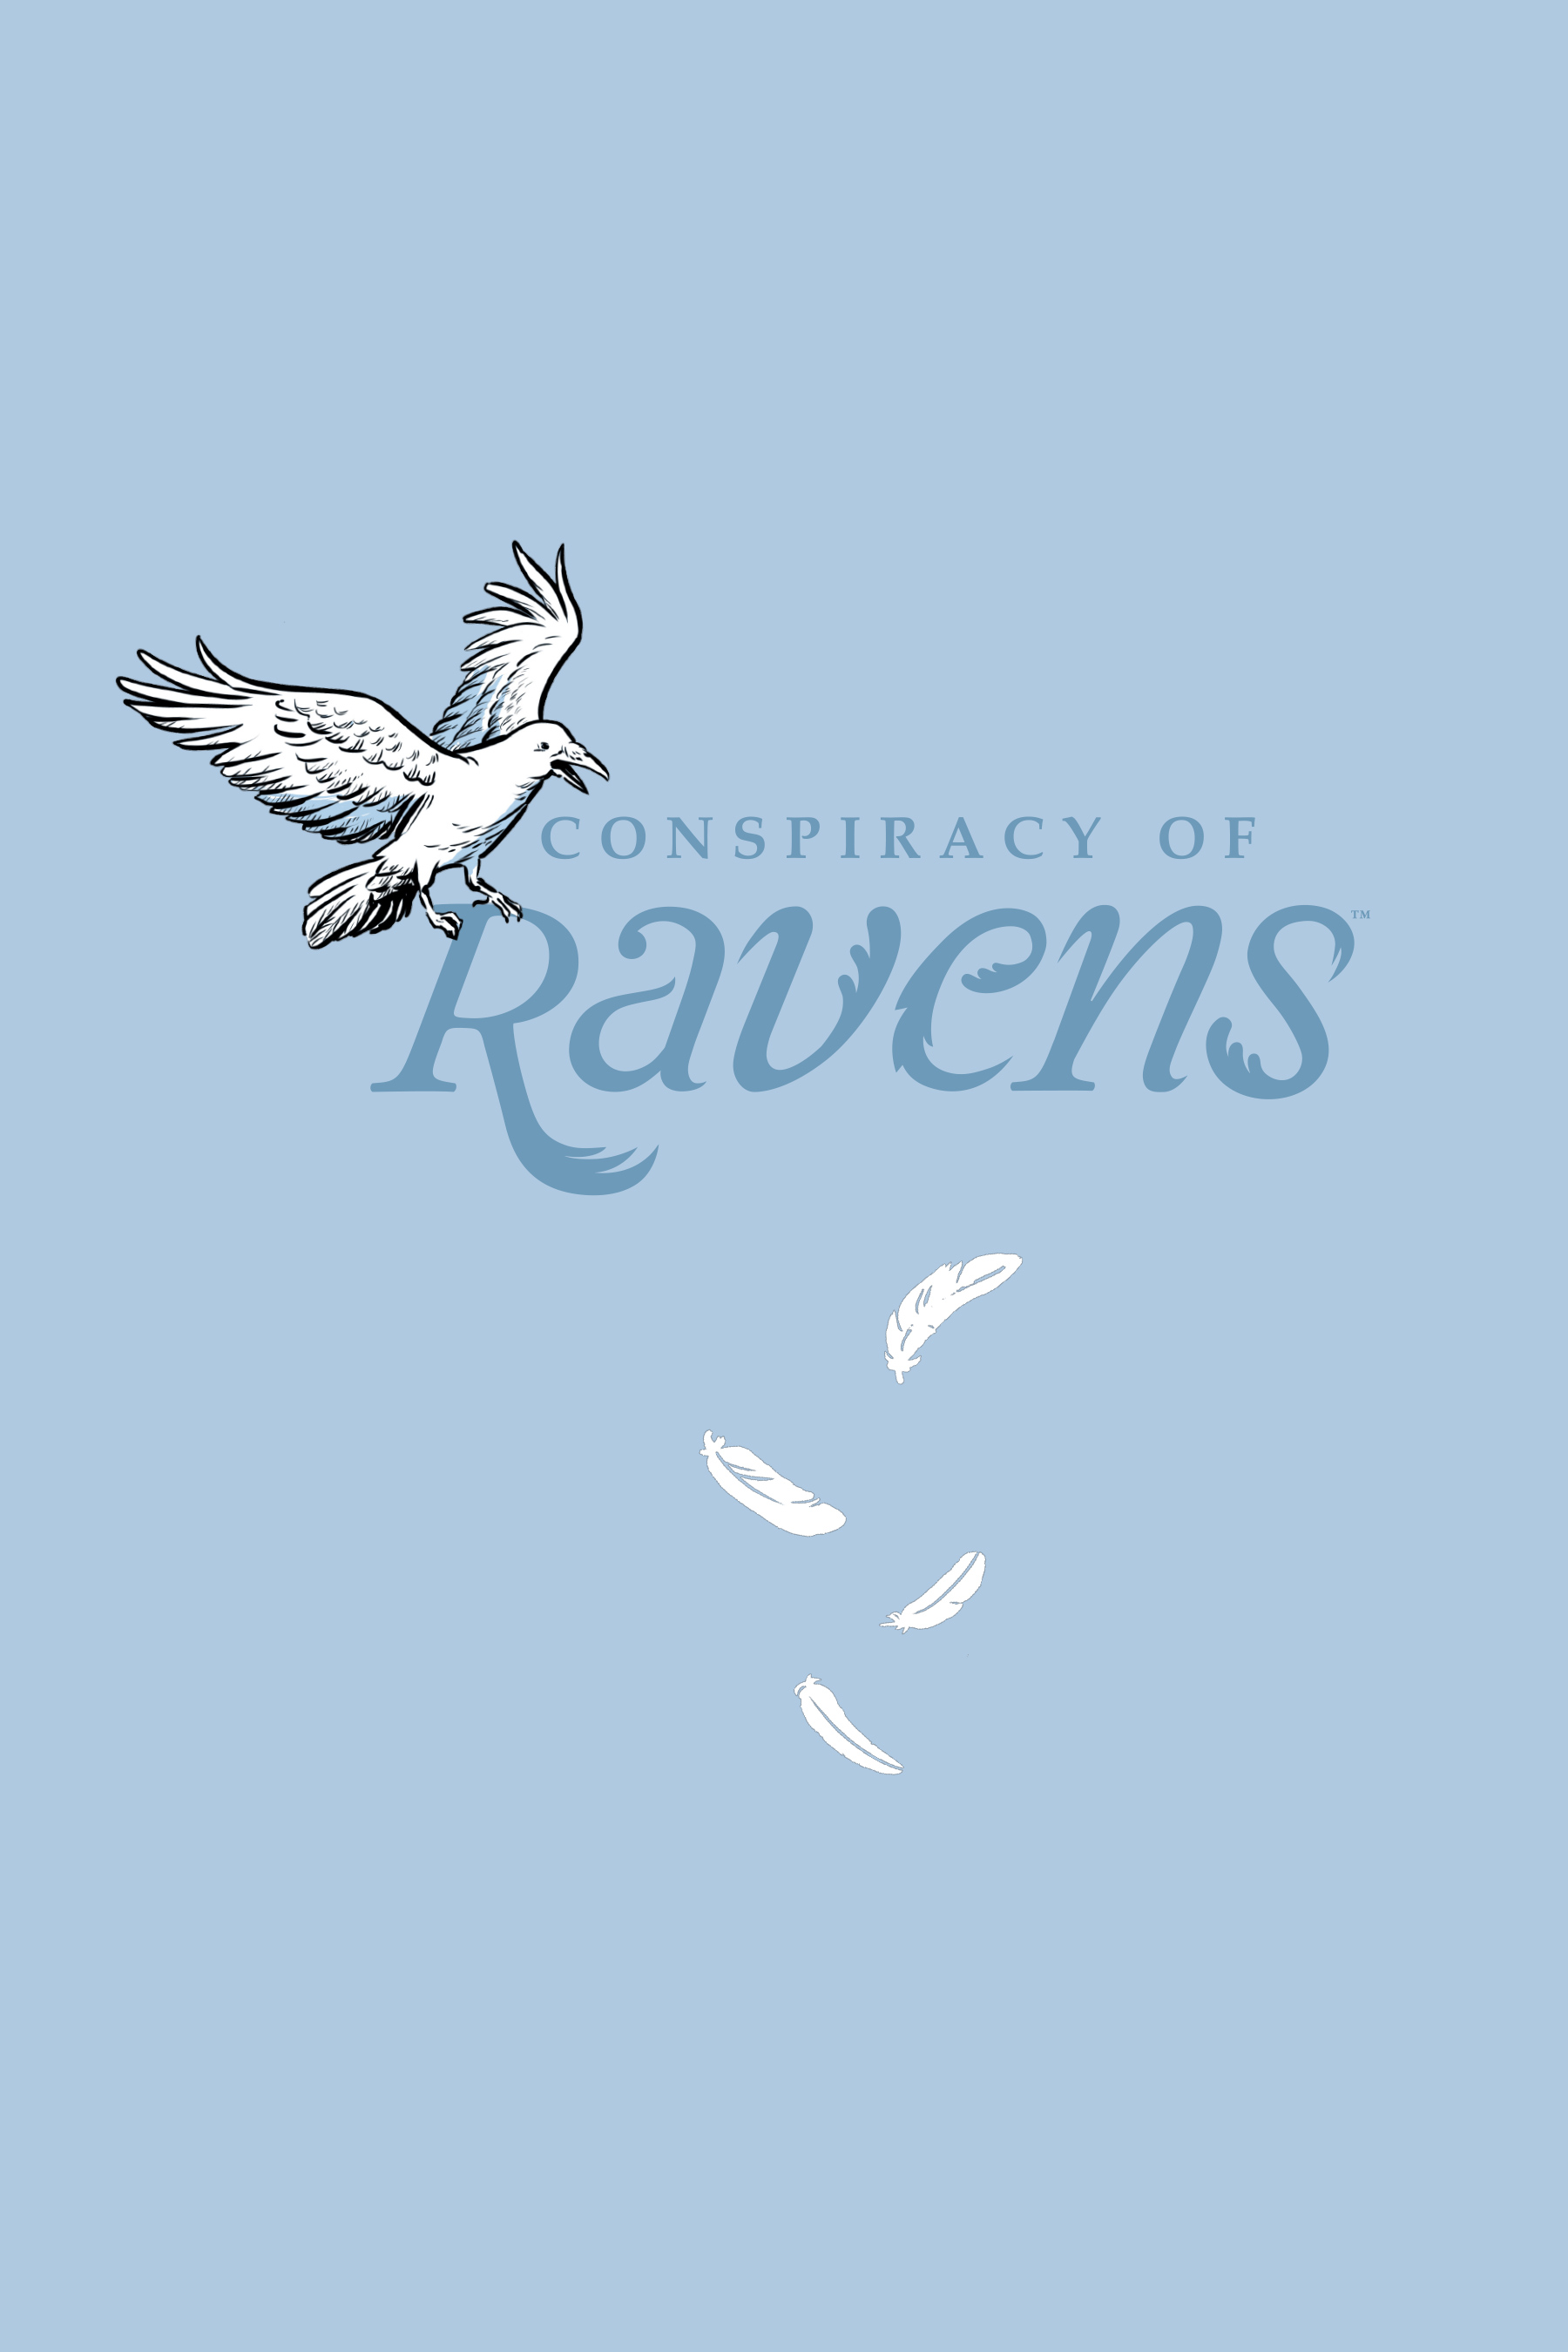 Read online Conspiracy of Ravens comic -  Issue # TPB - 3